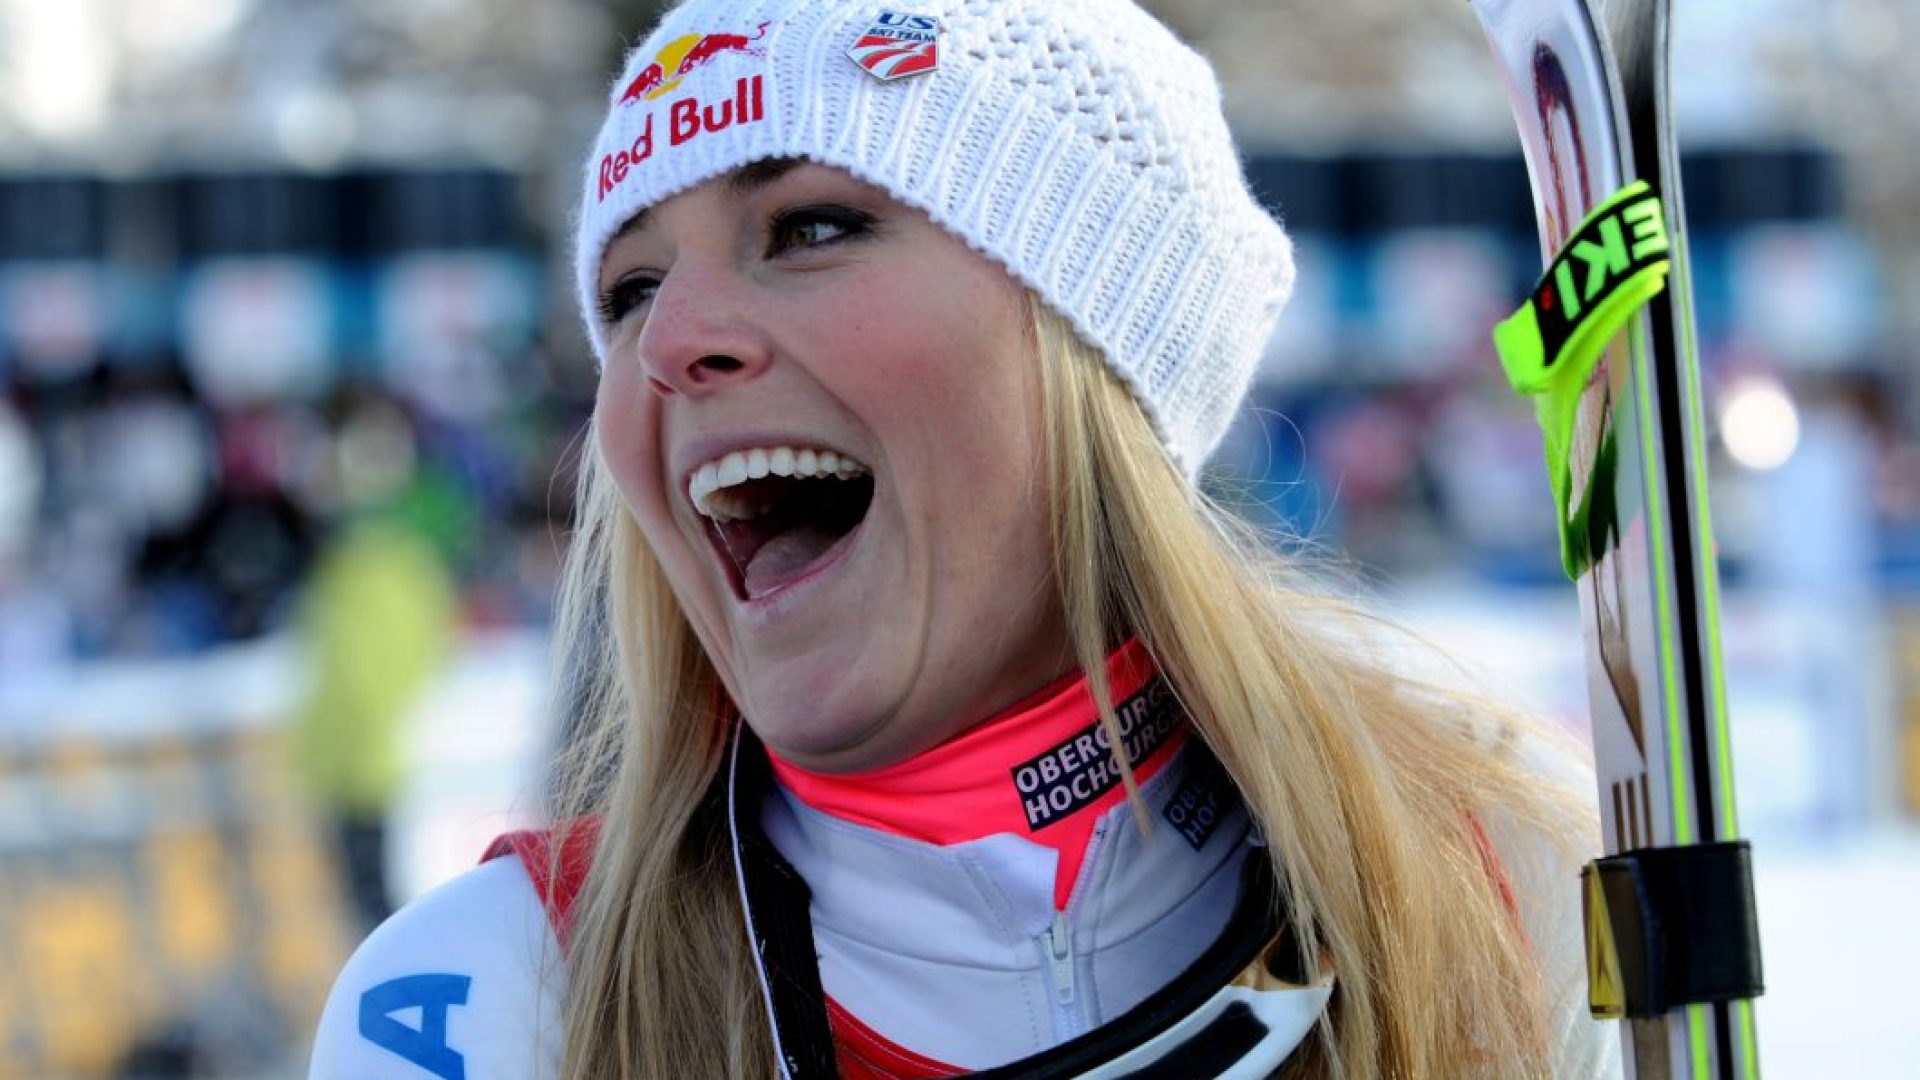 lindsey-after-her-victory-at-the-sg-in-st-moritz